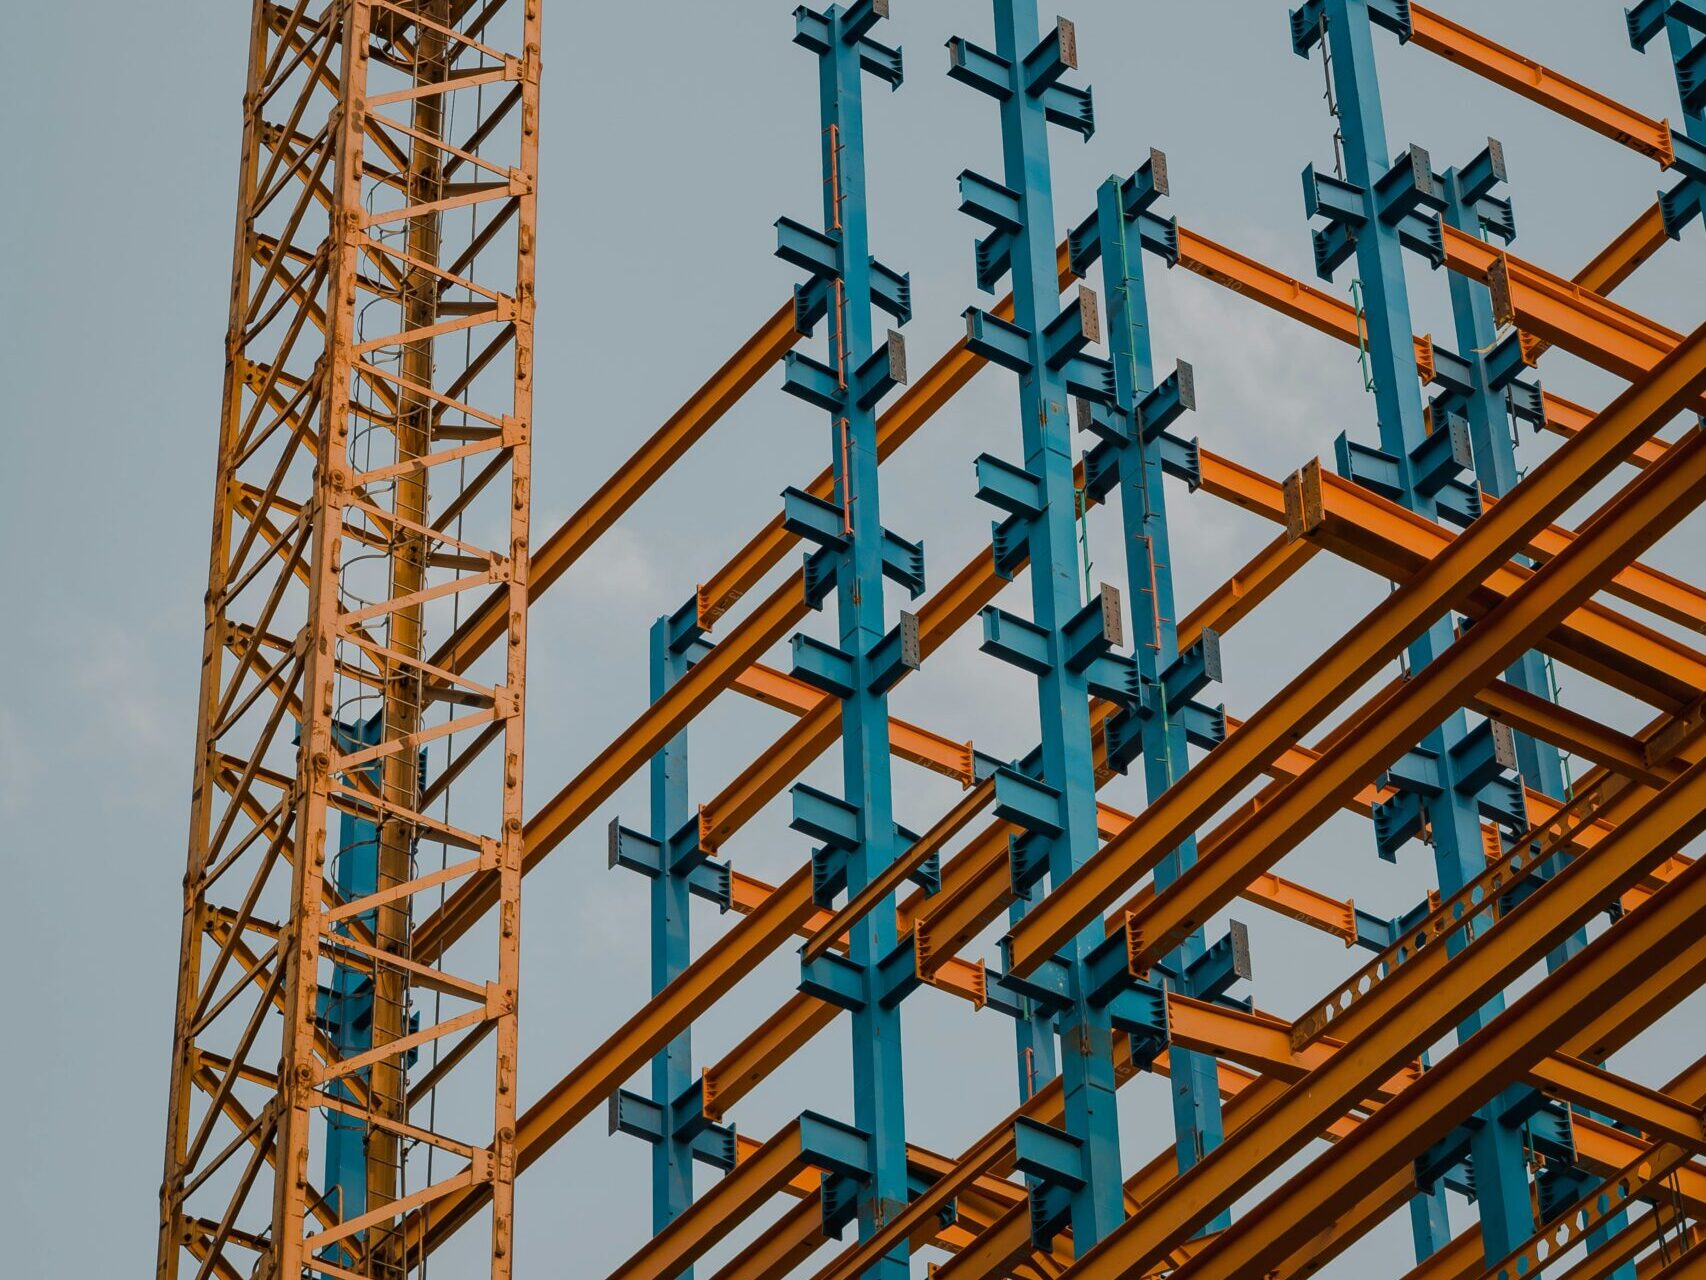 The impact of BIM and digitalization will create a revolution in the construction sector